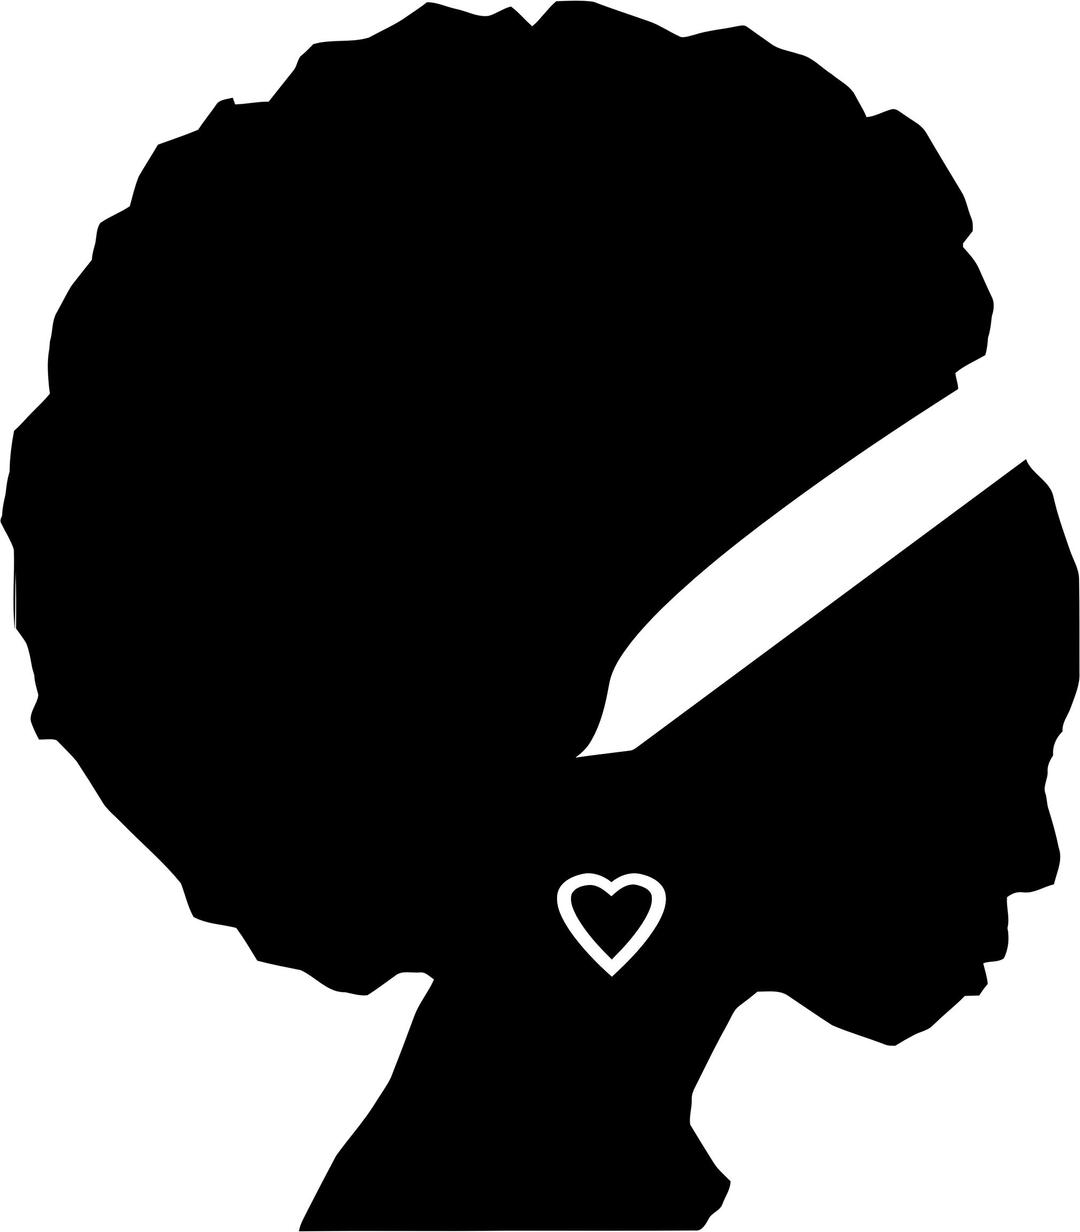 African American Woman Silhouette png transparent